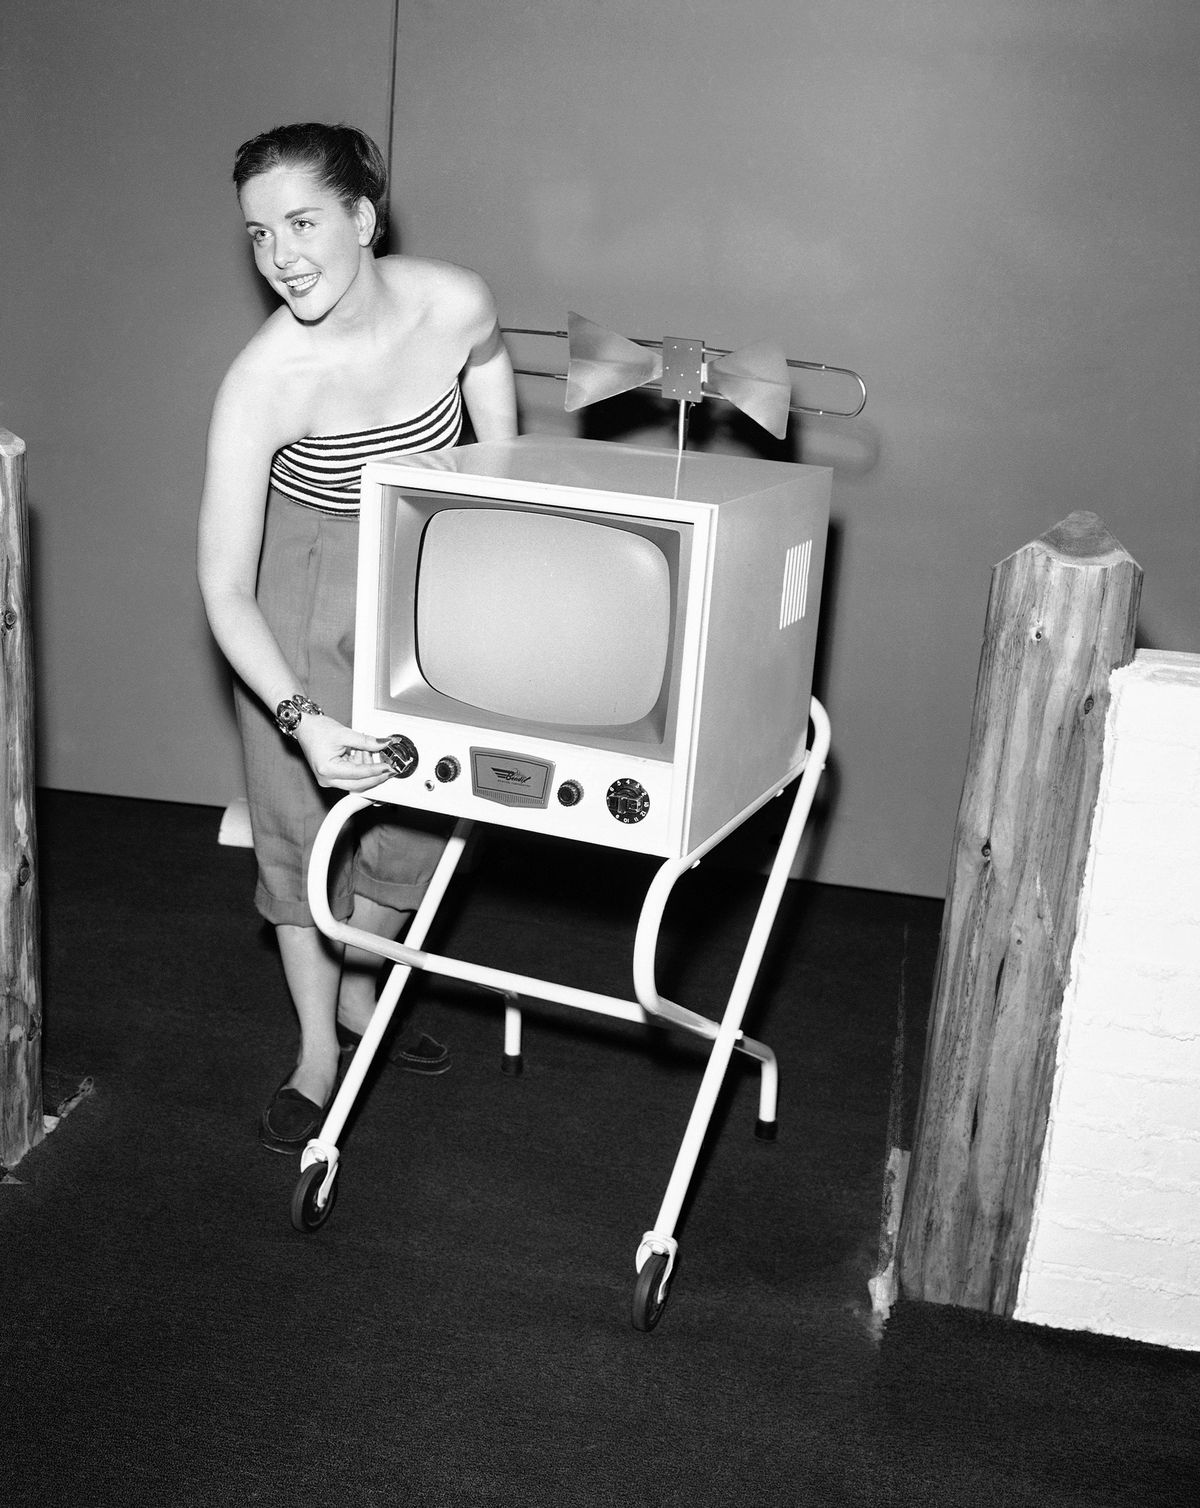 FILE - In this June 25, 1953, file photo, a demonstrator helps direct the eye to  a new television set for outdoor use, one of the new things at the Summer Home Furnishings Market in the American Furniture Mart in Chicago. TV was key to the world baby boomers were born into: a newly modernized world whose every problem (with the possible exception of the Cold War) seemed to promise an available solution. Polio would be cured! Man would go into space! Even African-Americans, oppressed for so long, had new reason for hope. TV chronicled this bracing wave of wonder and potential, and built upon it as an essential part of what distinguished boomers: They were pampered and privileged and ushered toward a sure-to-be-glorious future. (AP Photo/Edward Kitch, File) (AP)